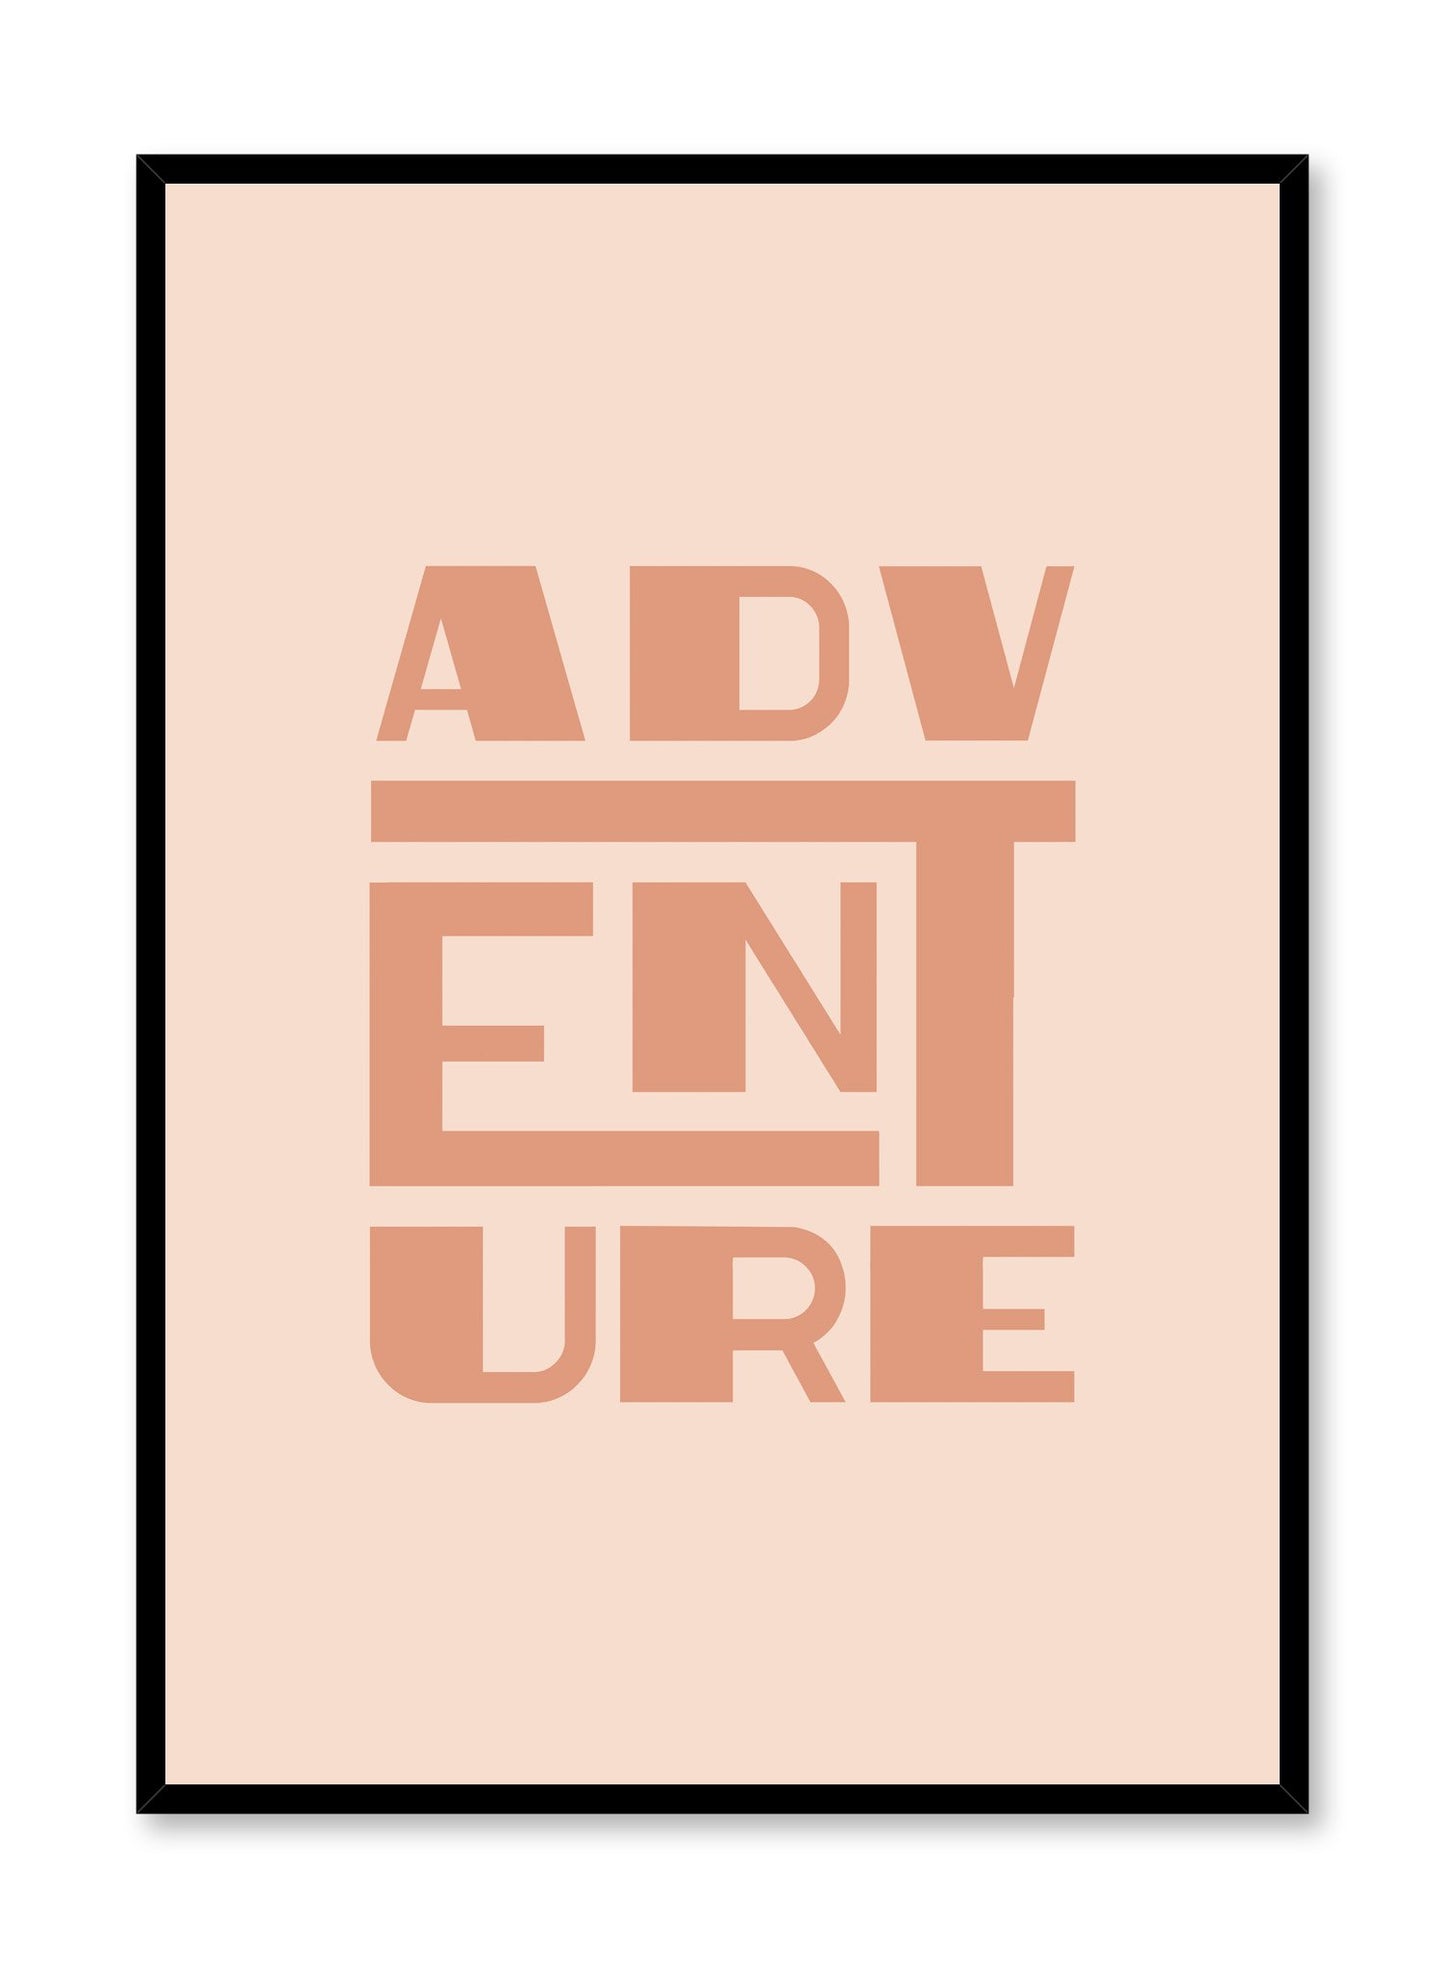 Modern minimalist orange typography poster by Opposite Wall with Adventure quote.